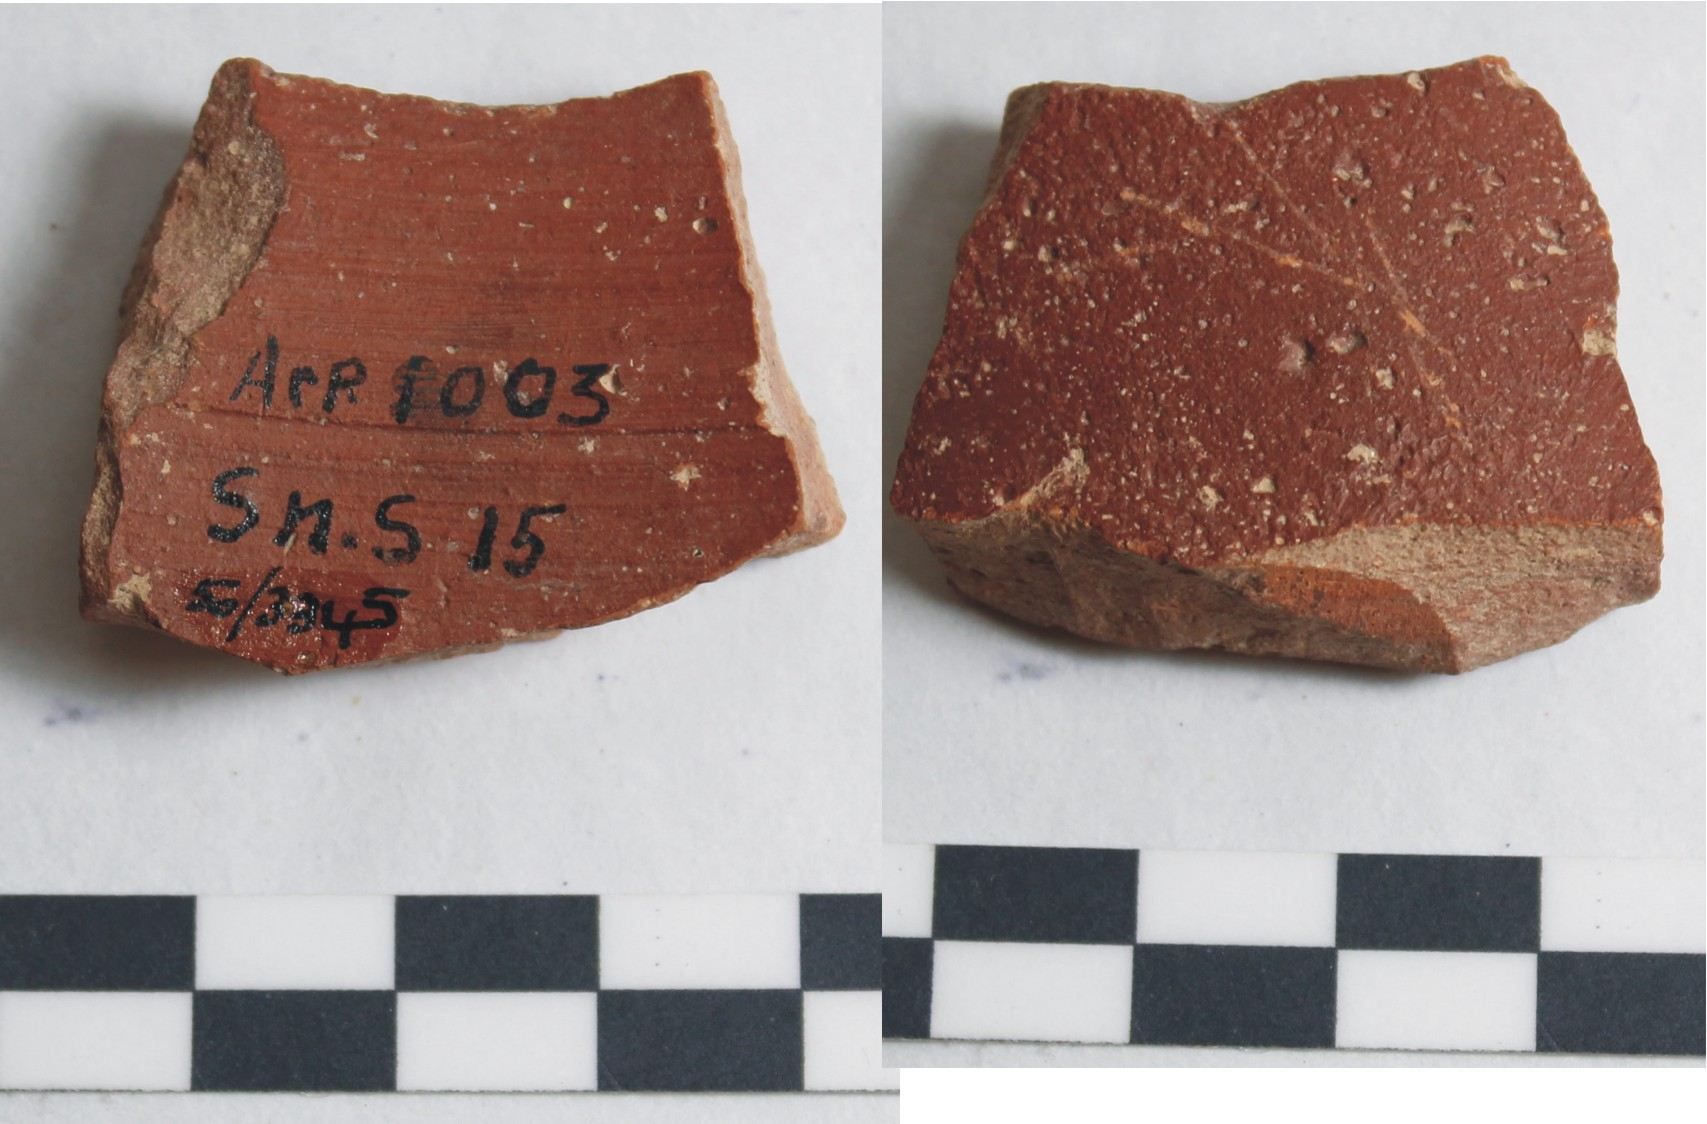 Image for: Sherd of a pottery vessel